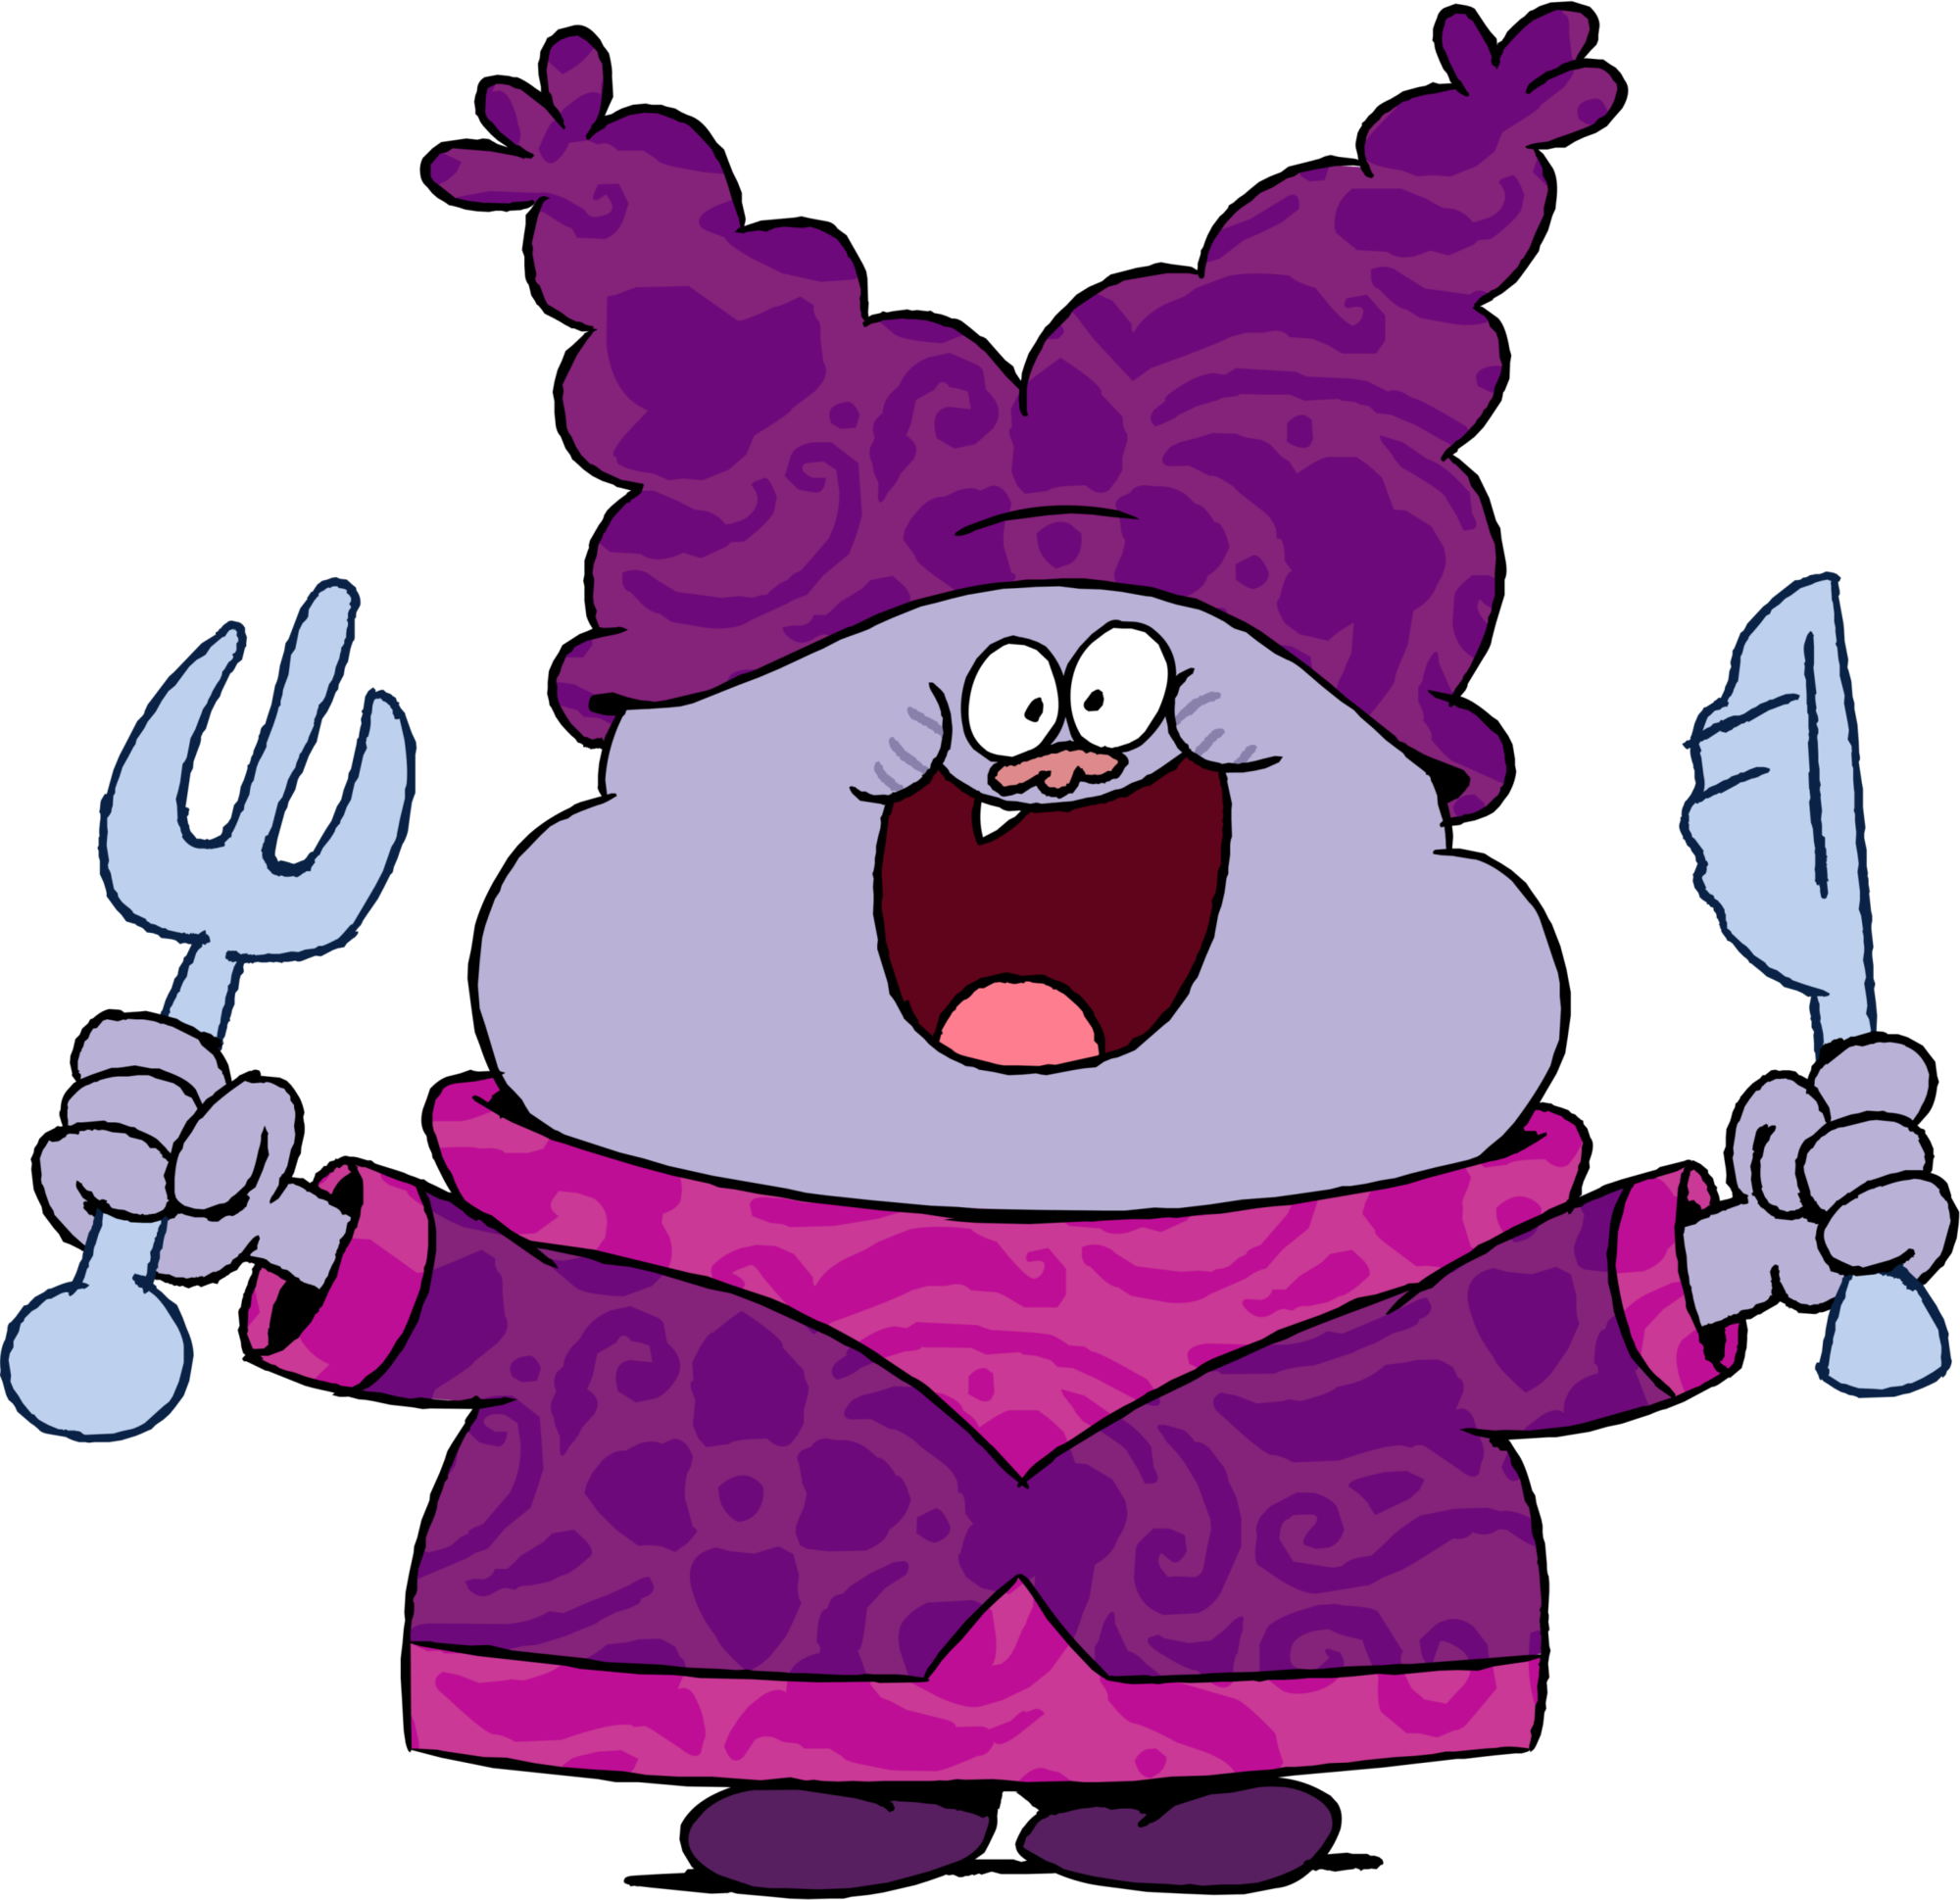 Image Result For Chowder Character Design Pinterest - Chowder Cartoon Png (2000x1939)